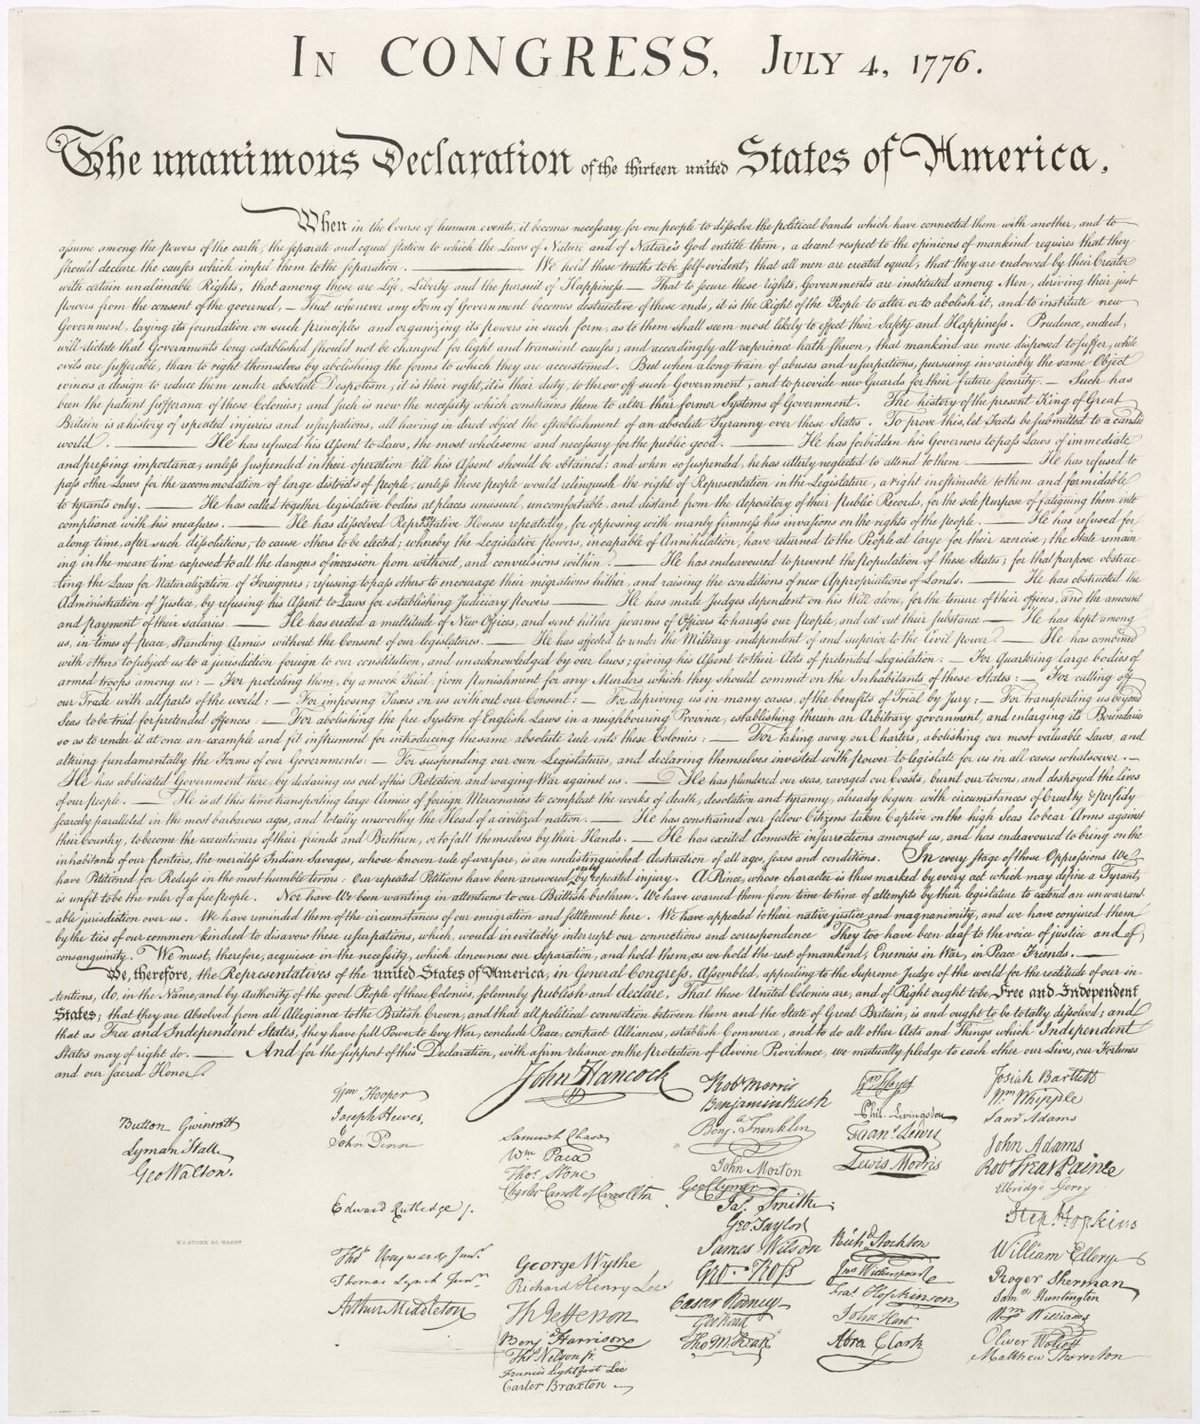 Manuscript of the Declaration of Independence.